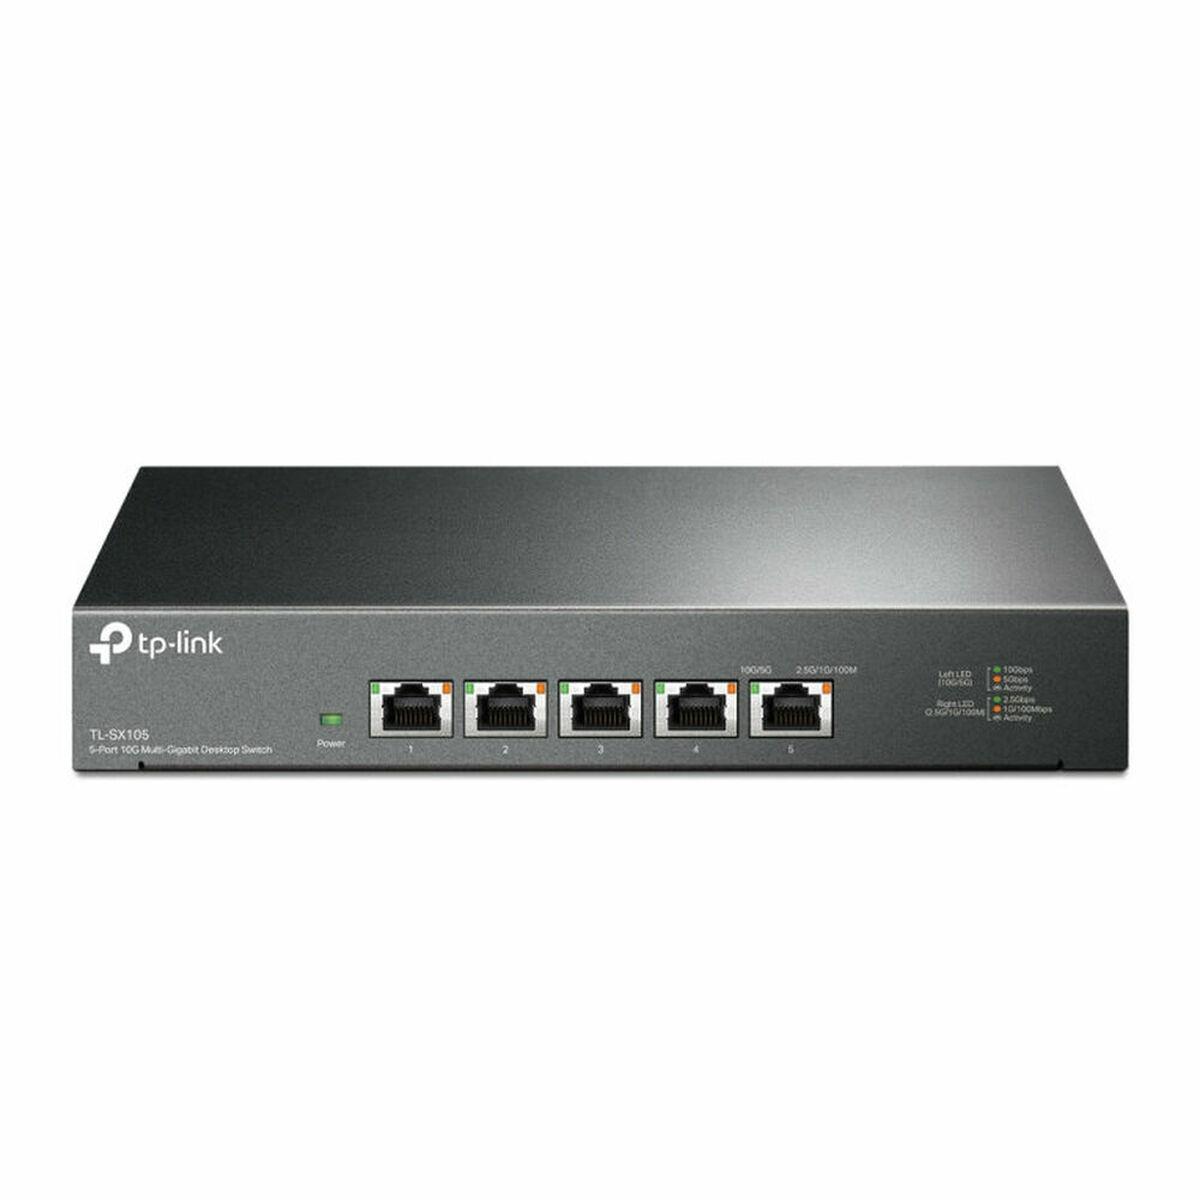 5 Switch 6935 TP-LINK